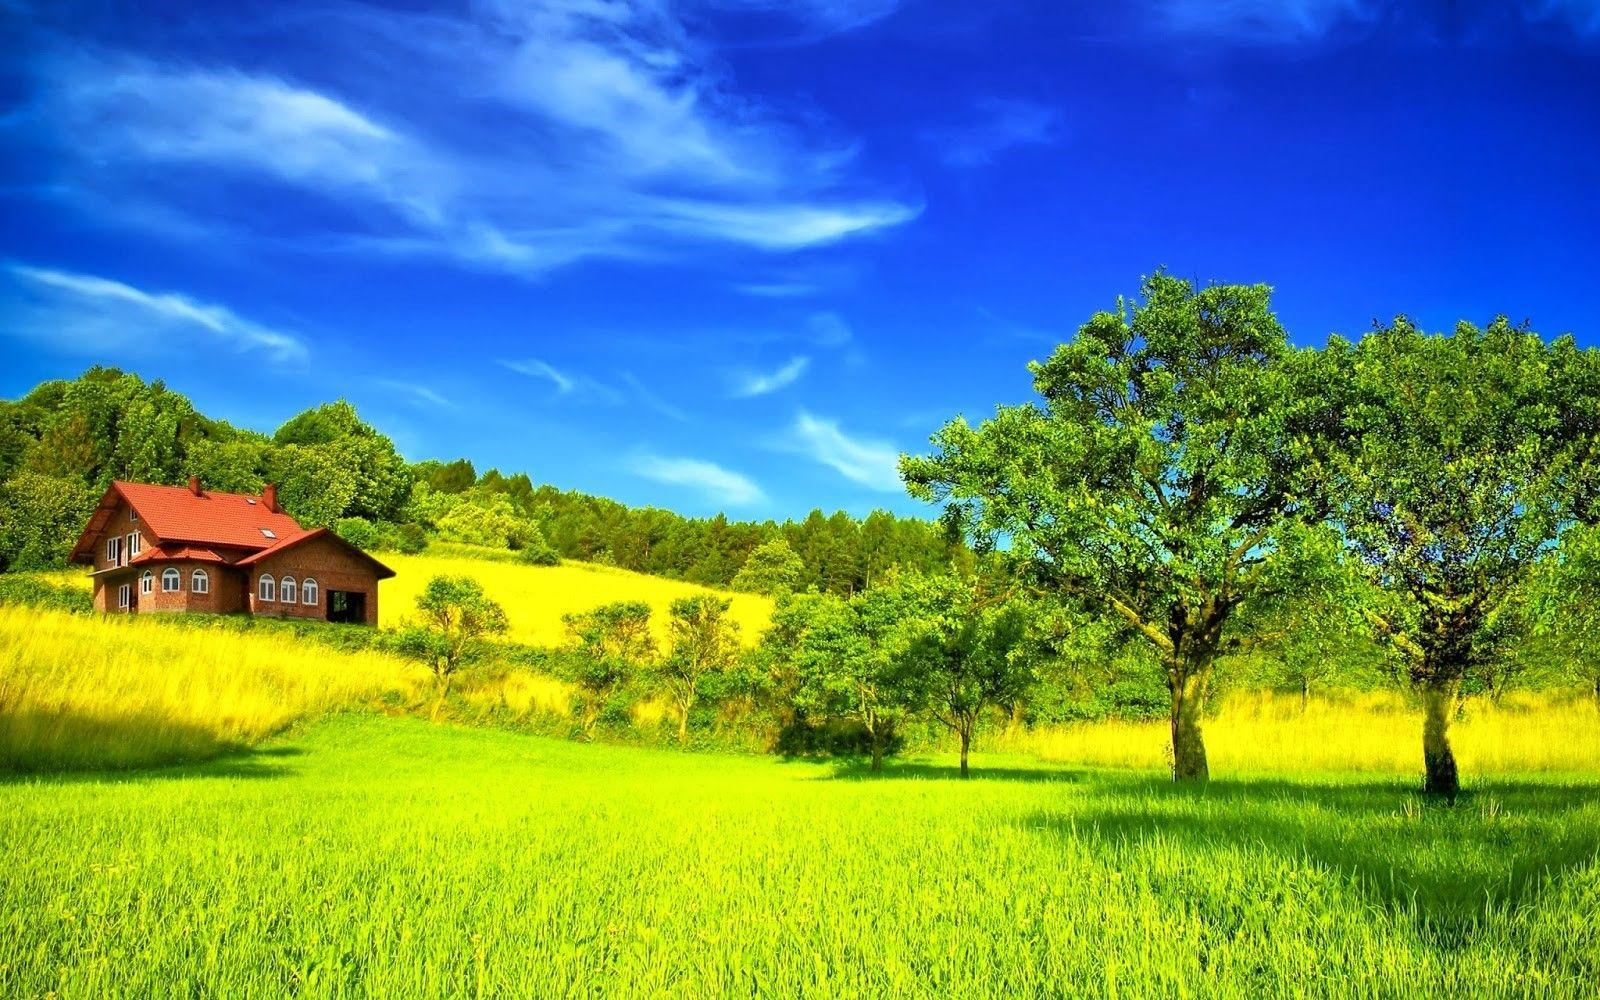 Green Nature Wallpapers - Top Free Green Nature Backgrounds